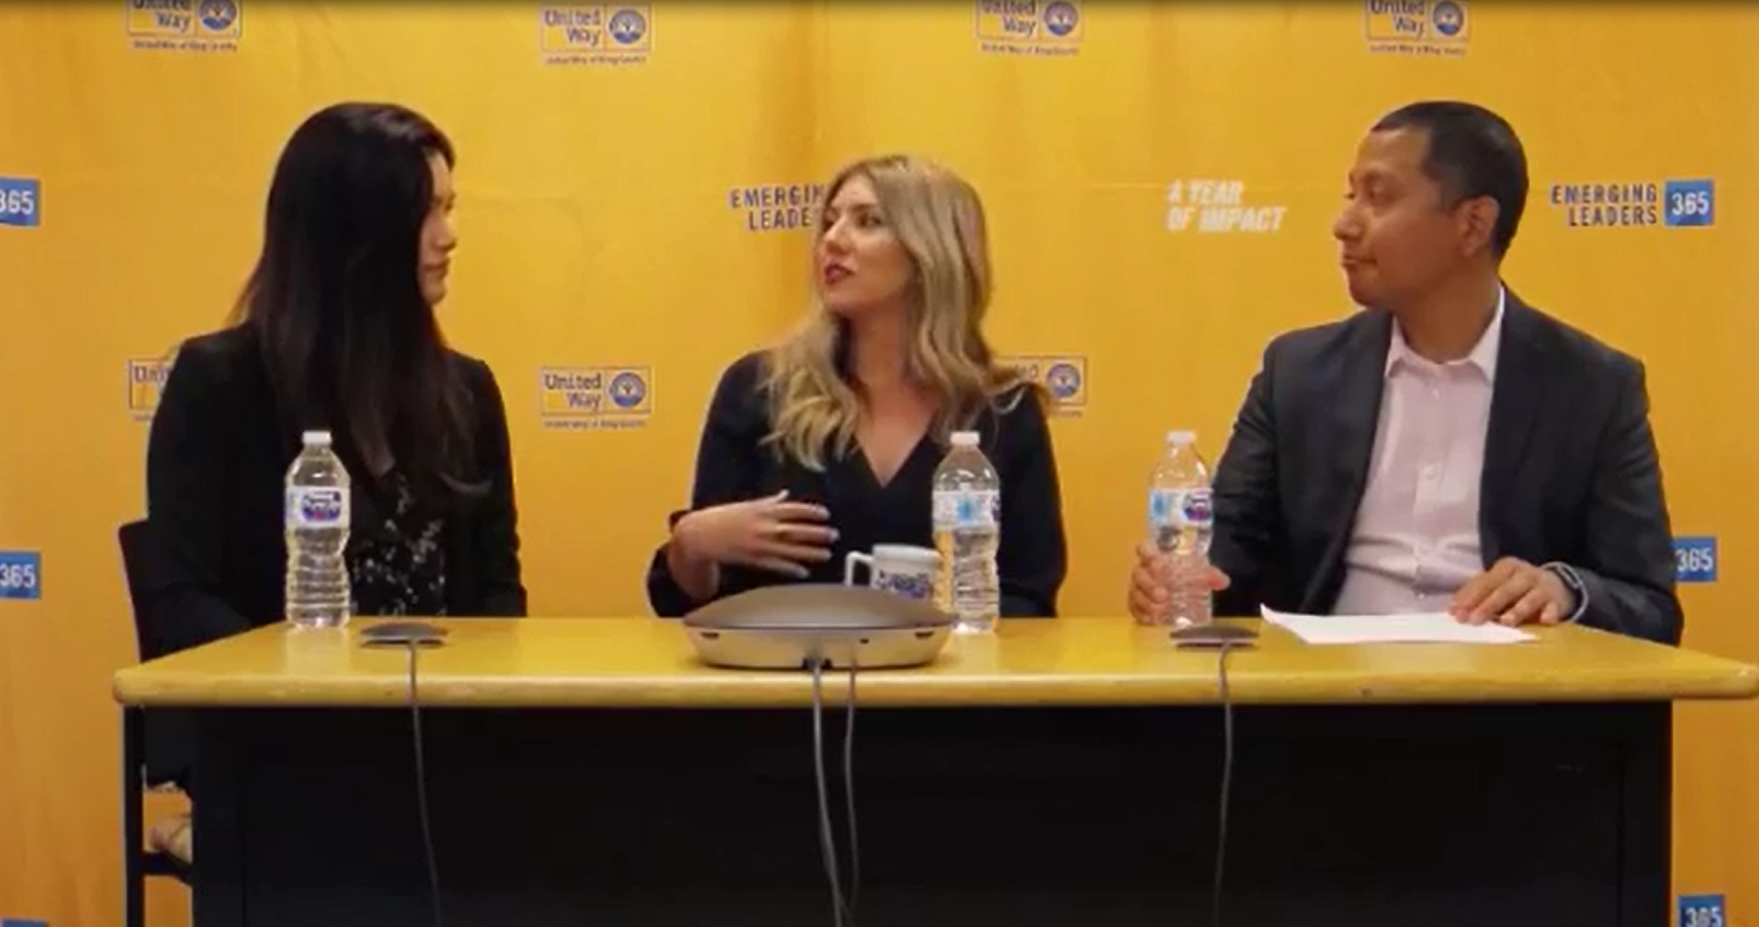 Image of the panelists sitting in front of a yellow background and talking